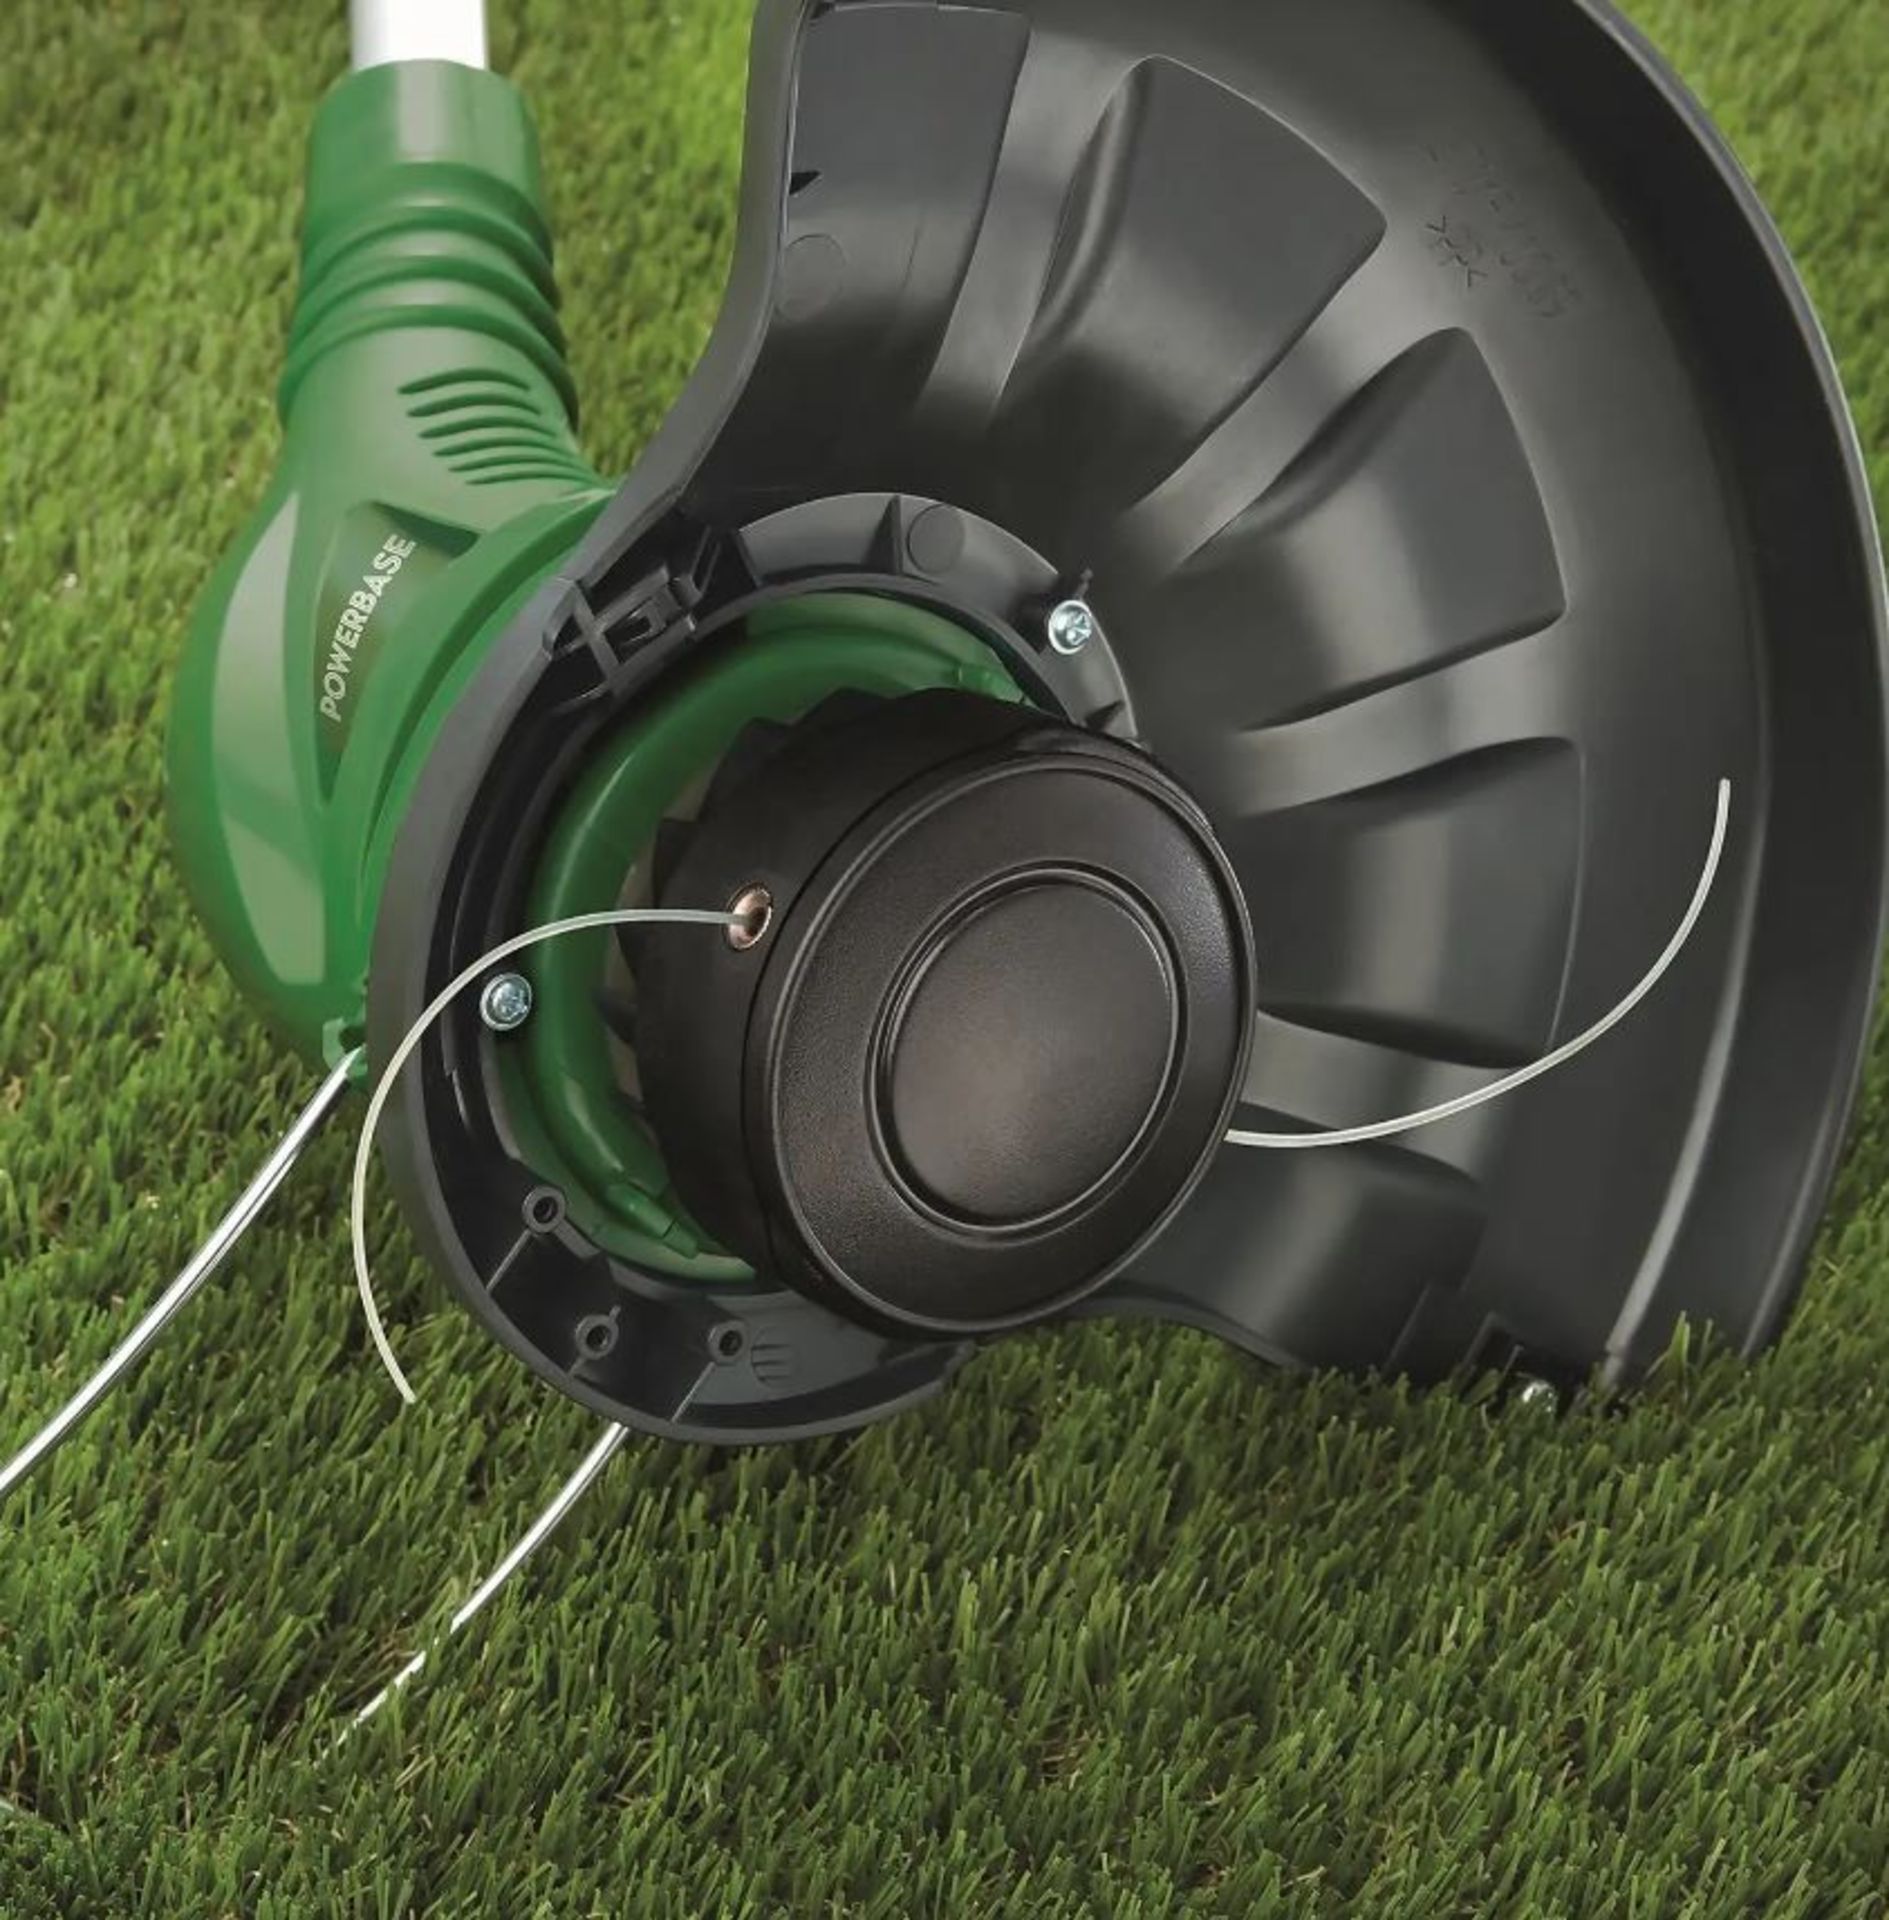 (R11J) 2x Powerbase 30cm 450W Electric Grass Trimmer. - Image 2 of 3